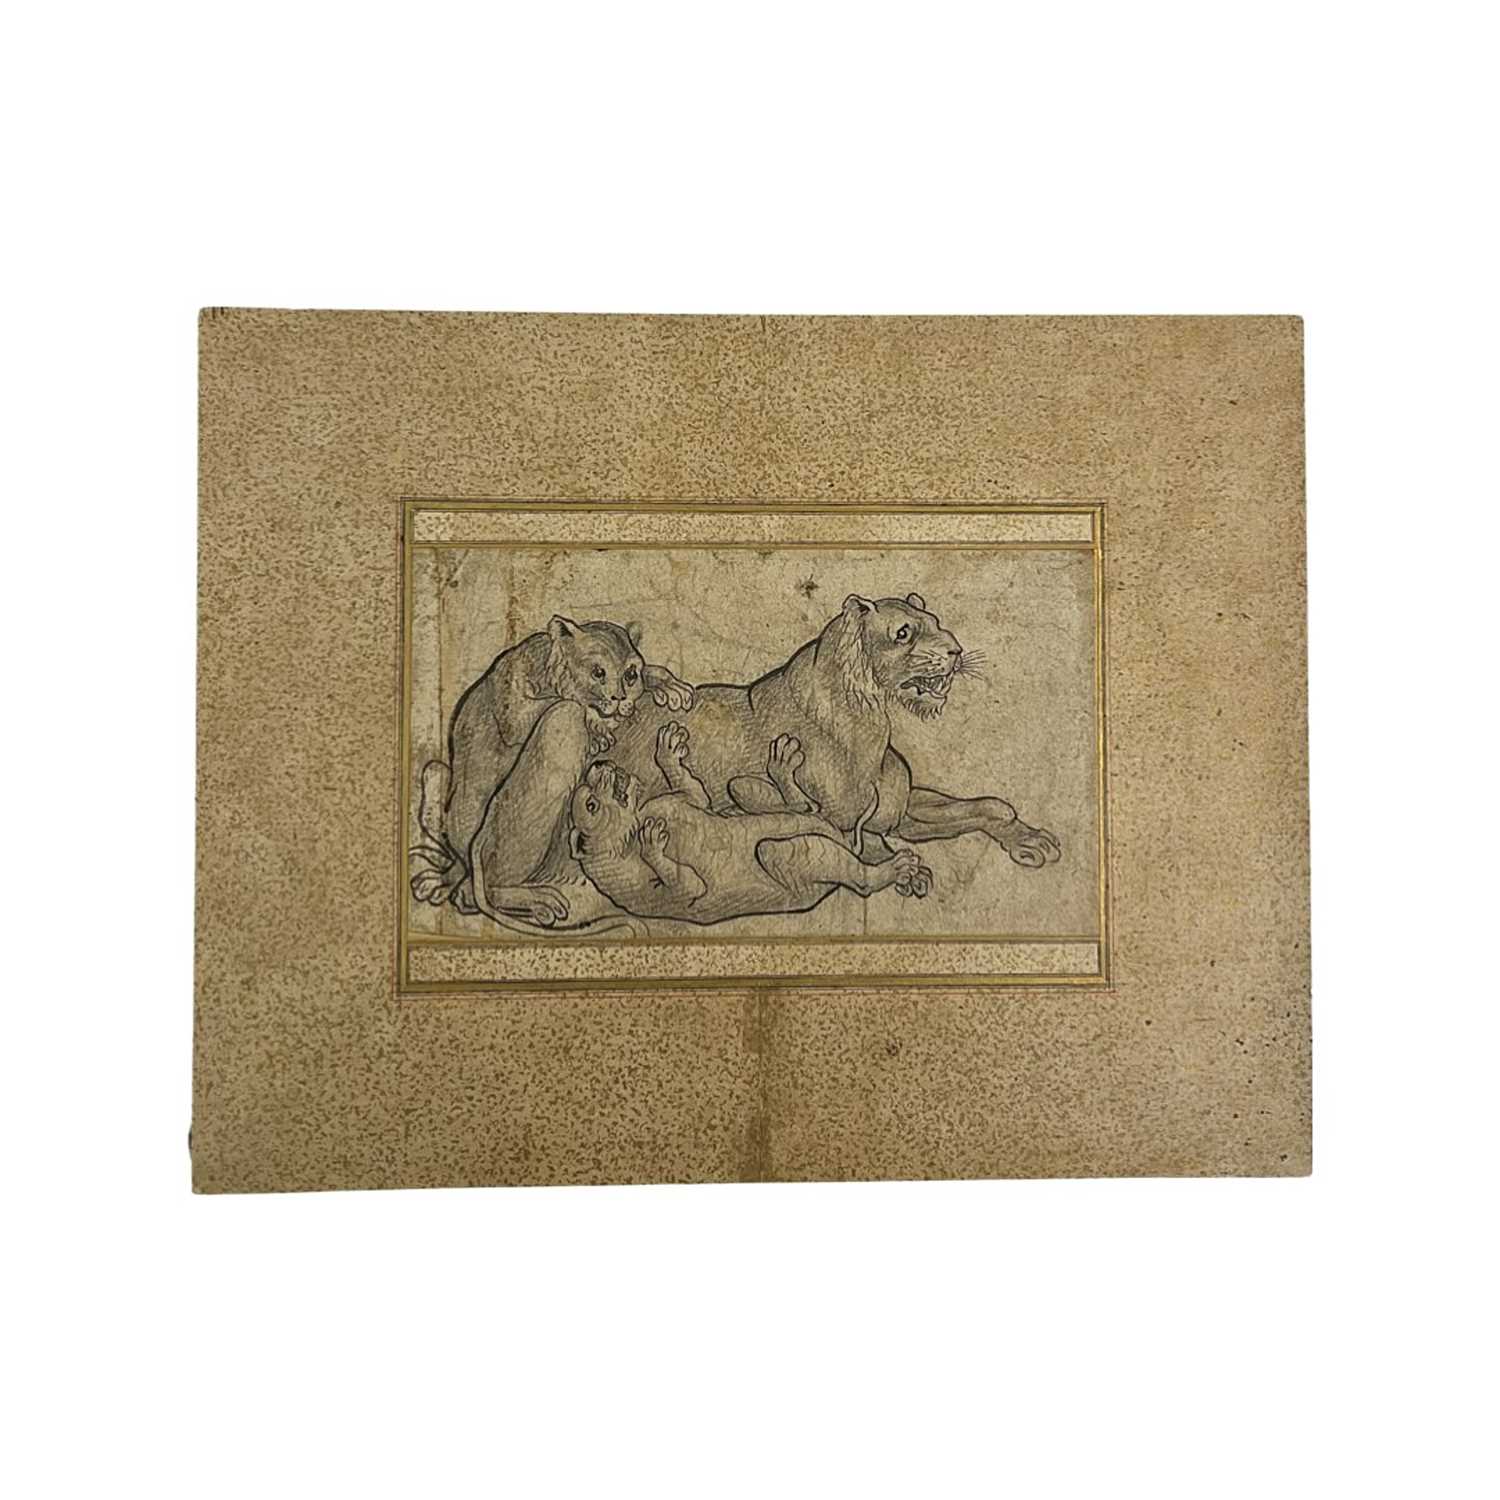 AN 18TH / 19TH CENTURY PERSIAN PEN AND INK DRAWING OF TIGERS n 18th